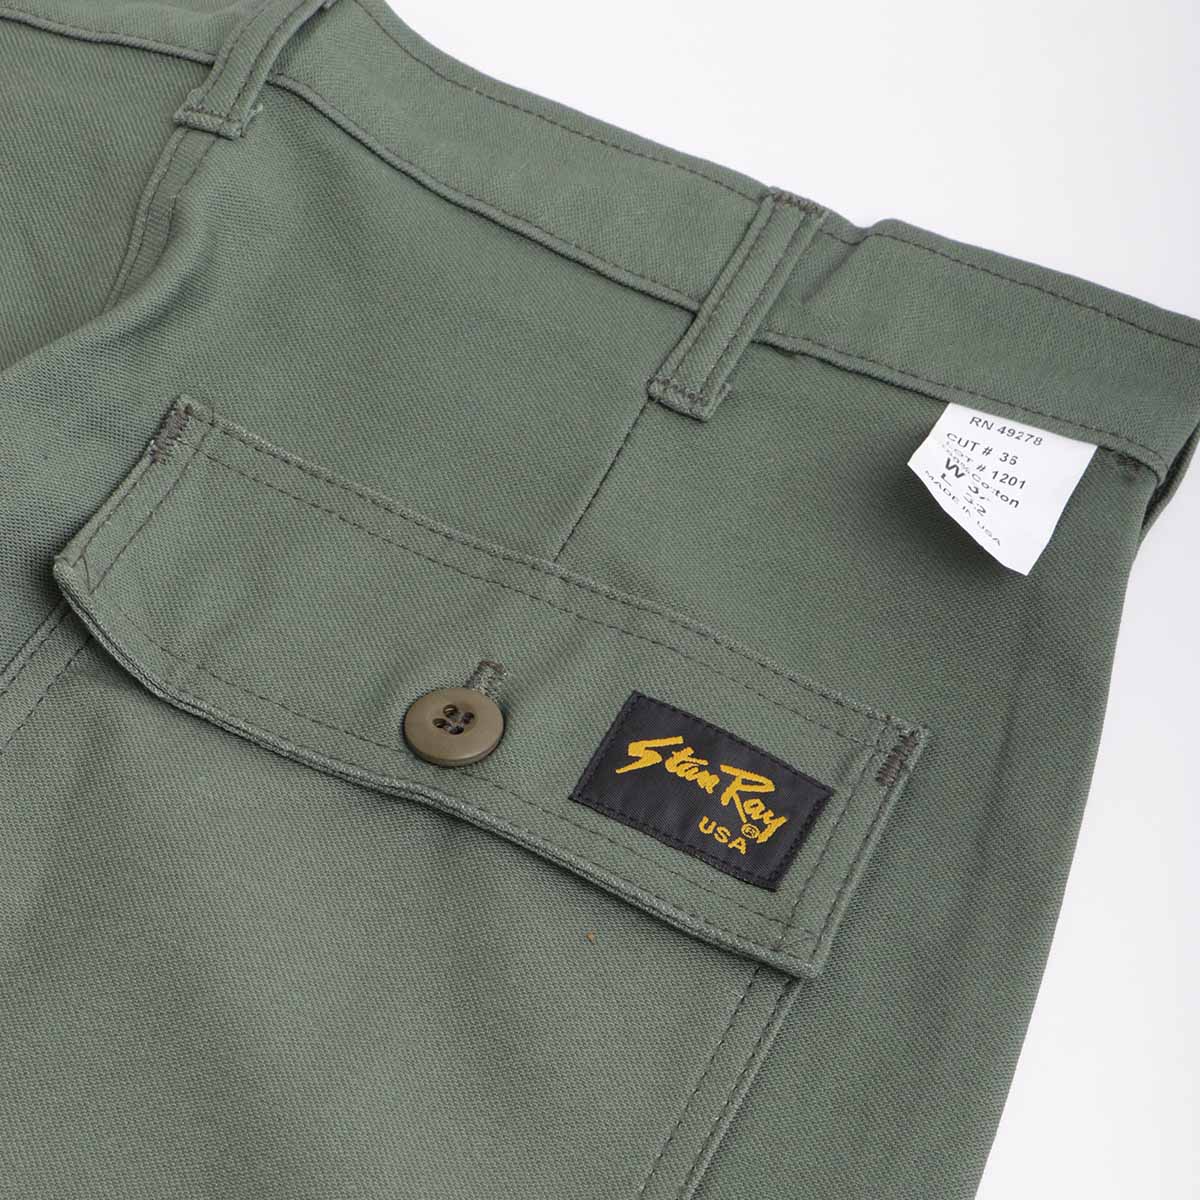 Stan Ray Slim Fit 4 Pocket Fatigue Pant - 1300 Series - Olive